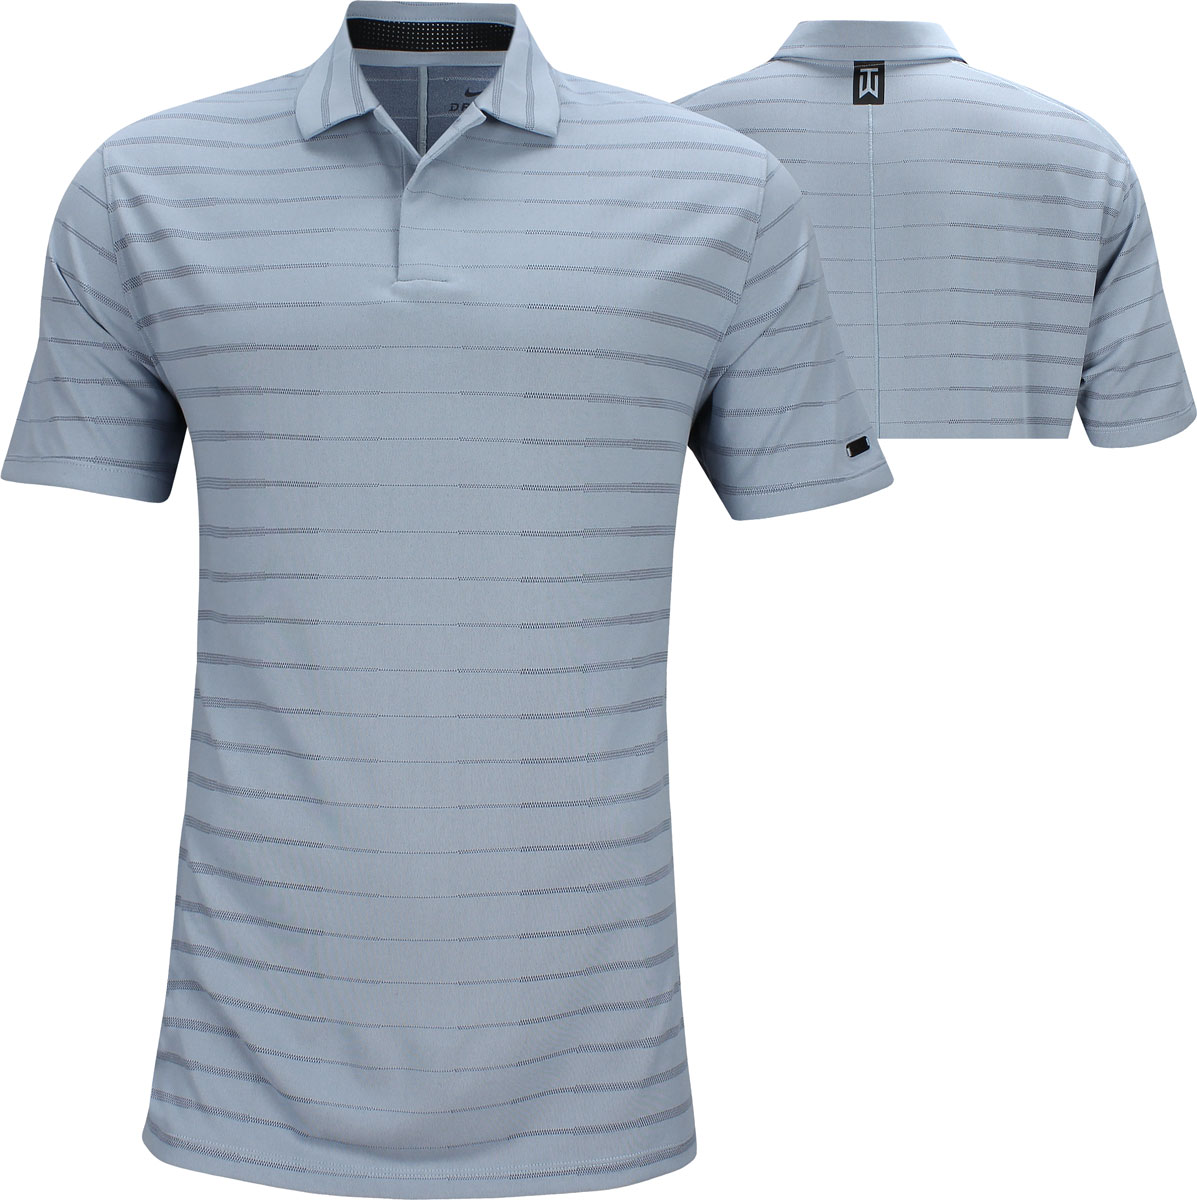 tiger woods nike shirt if anyone can